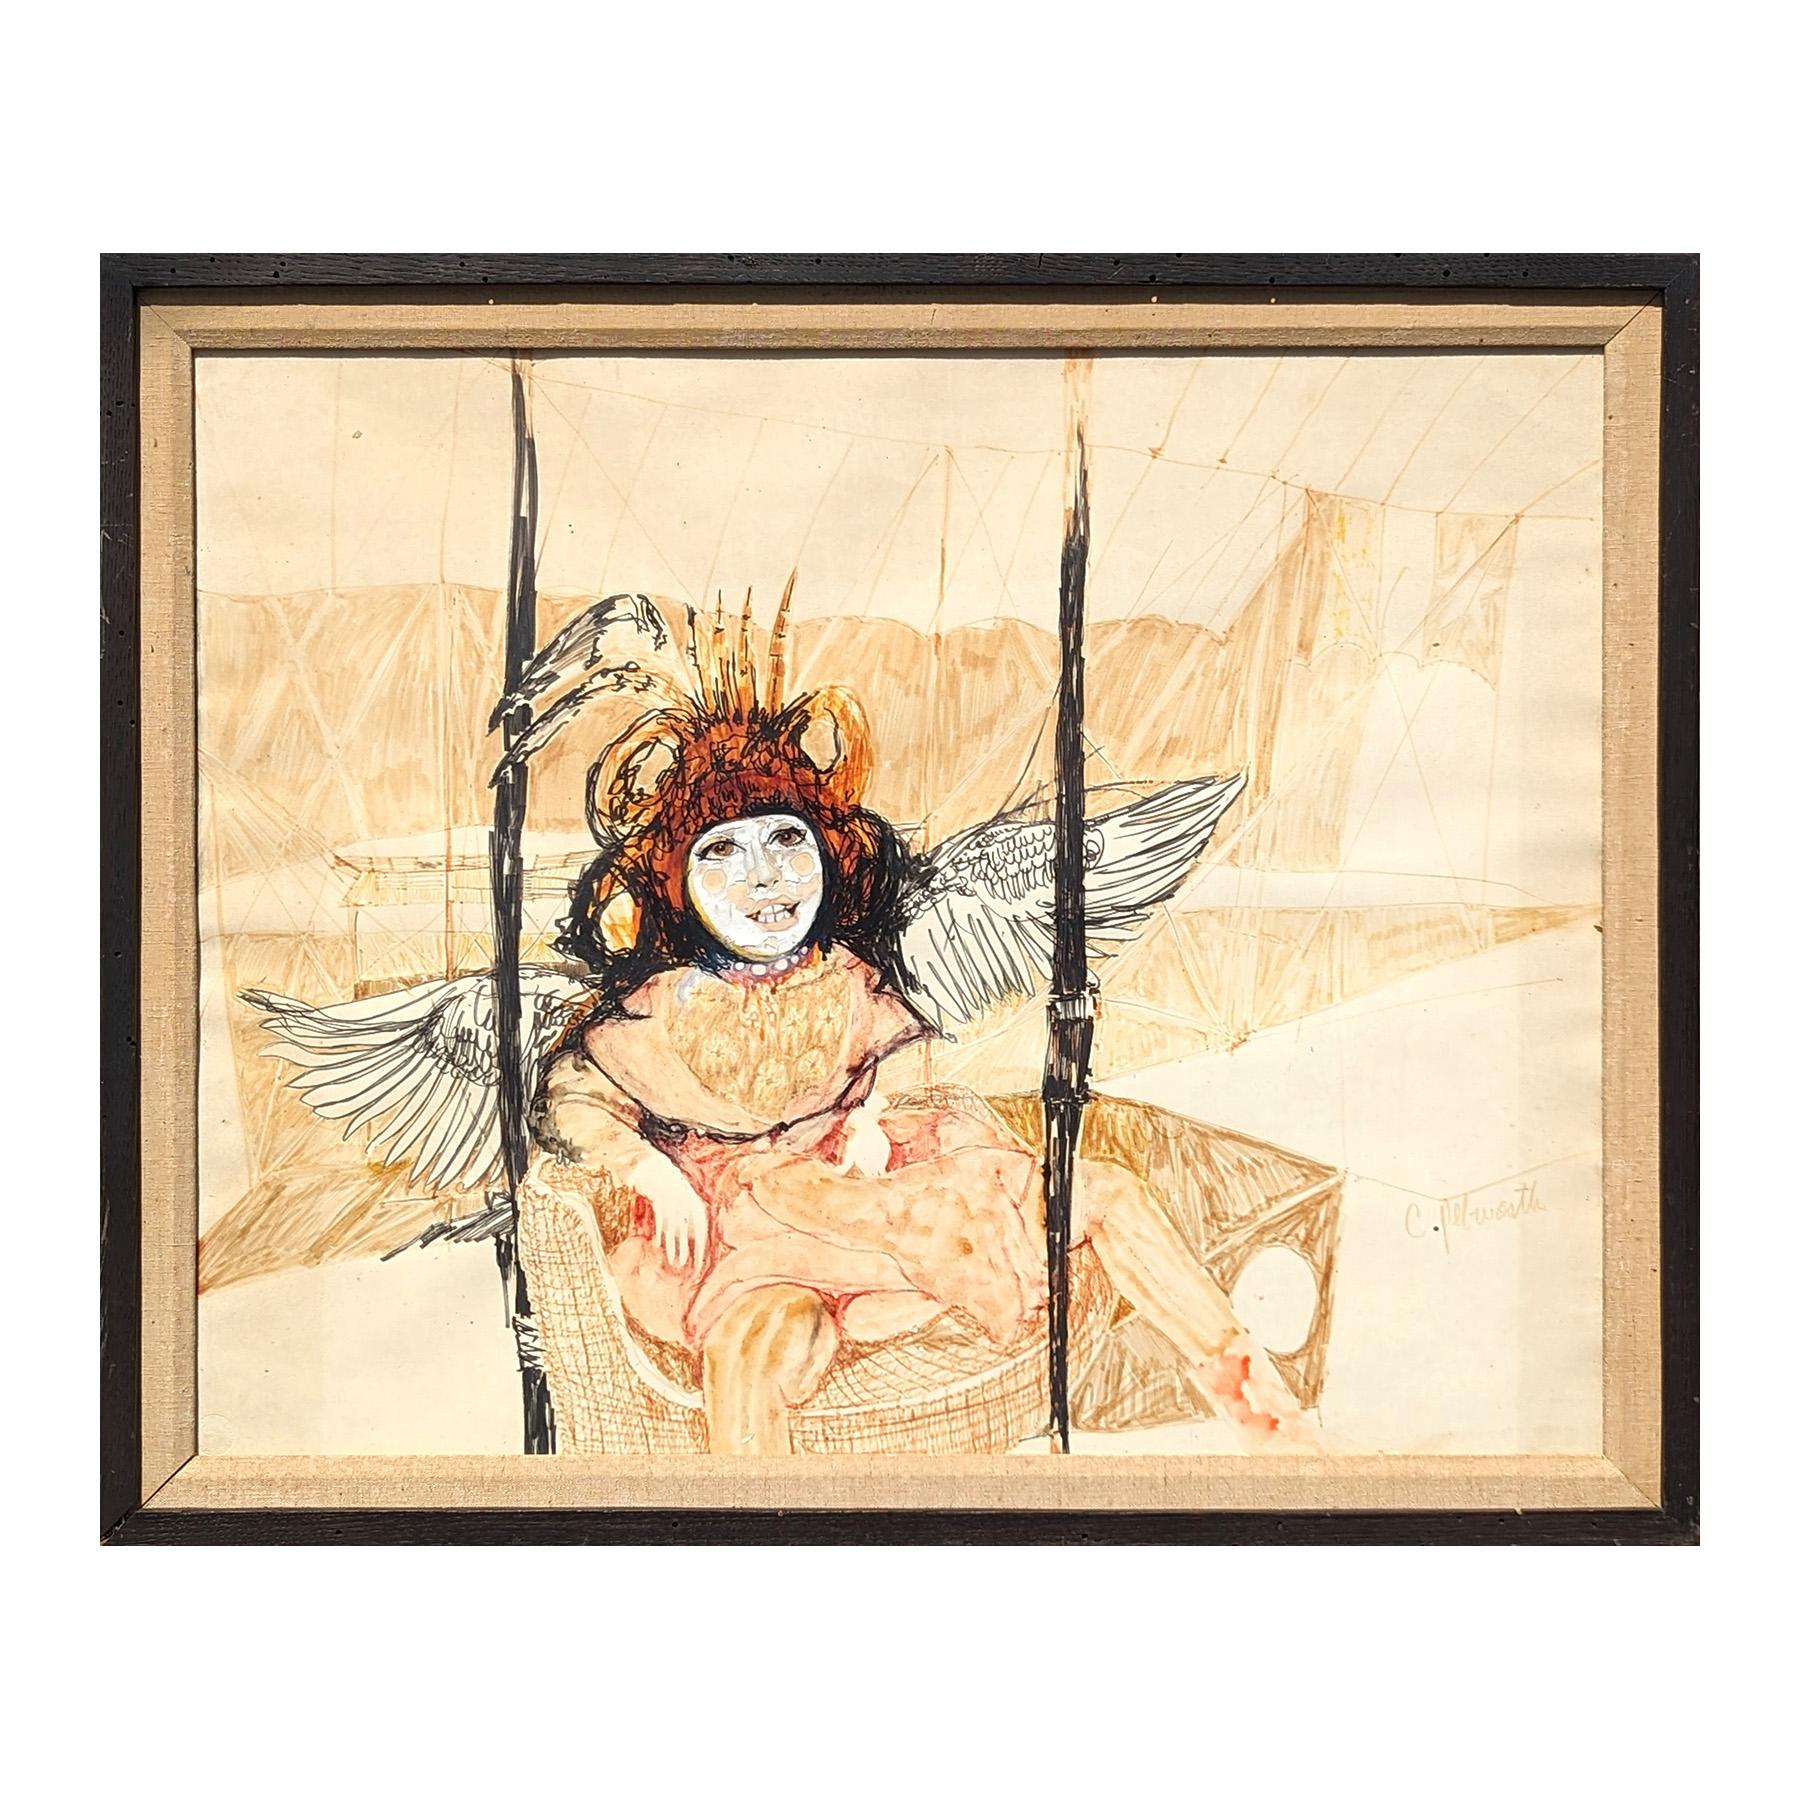 Modern Abstract Neutral Tone Figurative Drawing of a Woman with Wings - Painting by Charles Pebworth